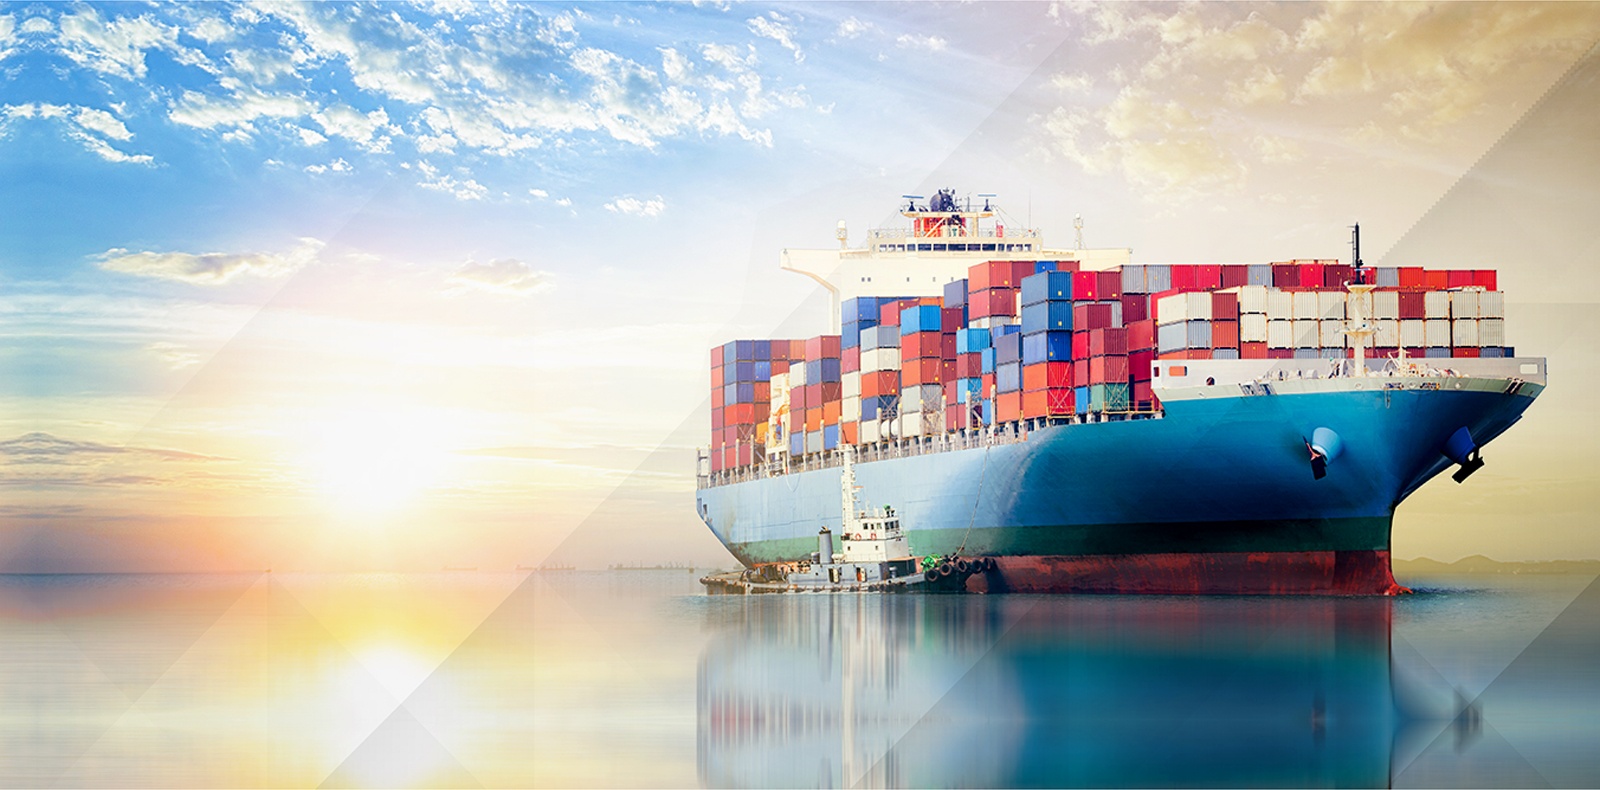 A&Z Consulting offers Import, Export Trading, Logistic Services Worldwide